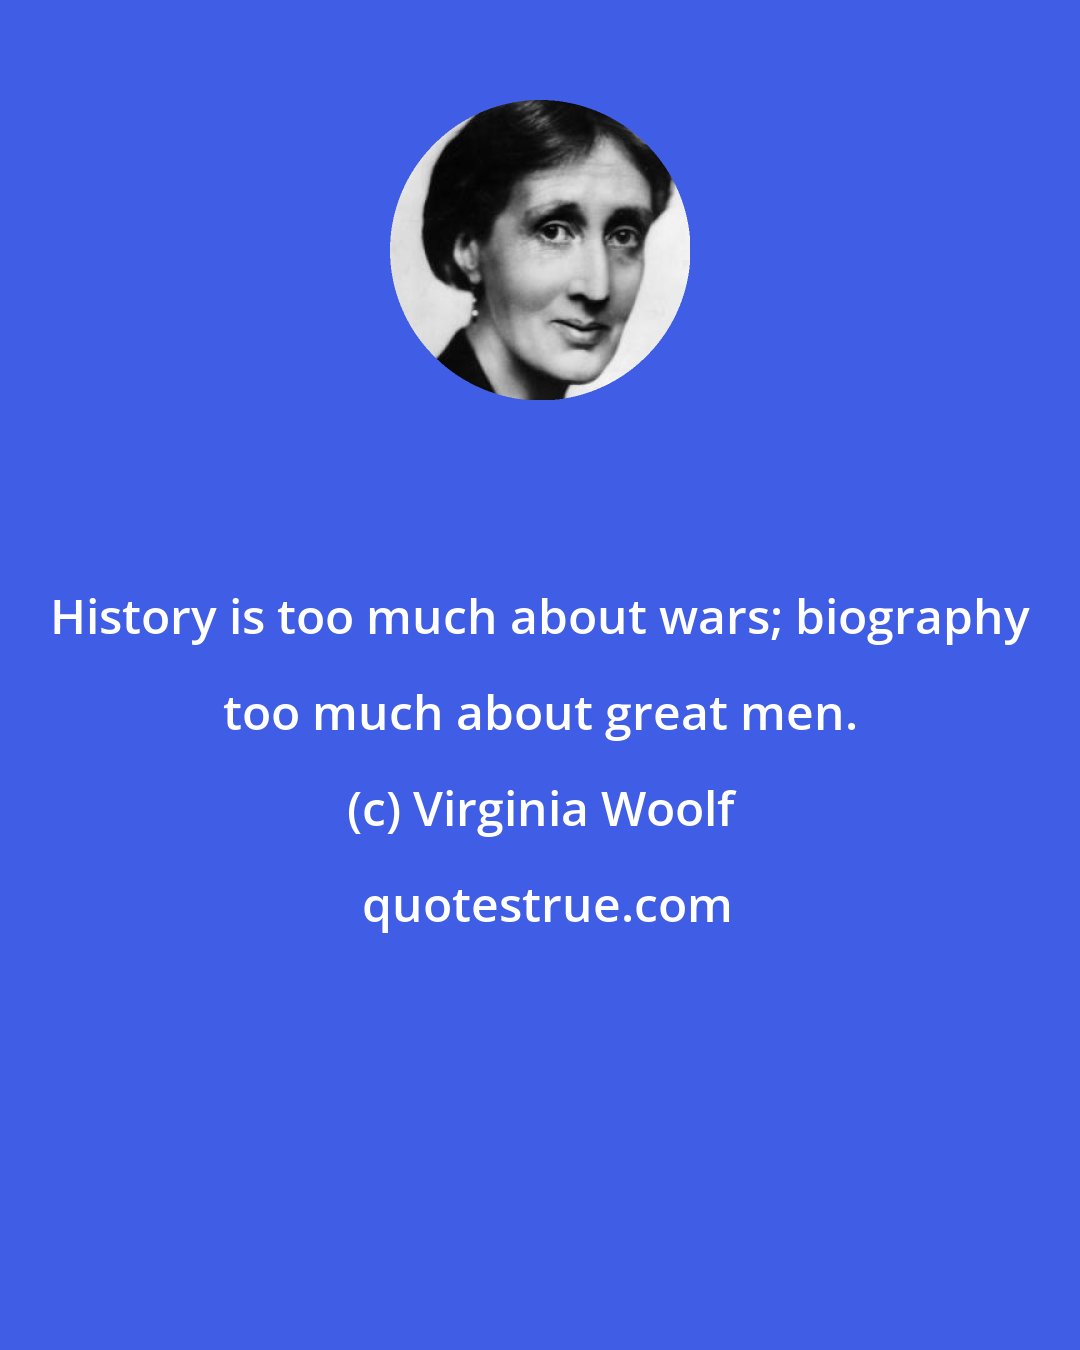 Virginia Woolf: History is too much about wars; biography too much about great men.